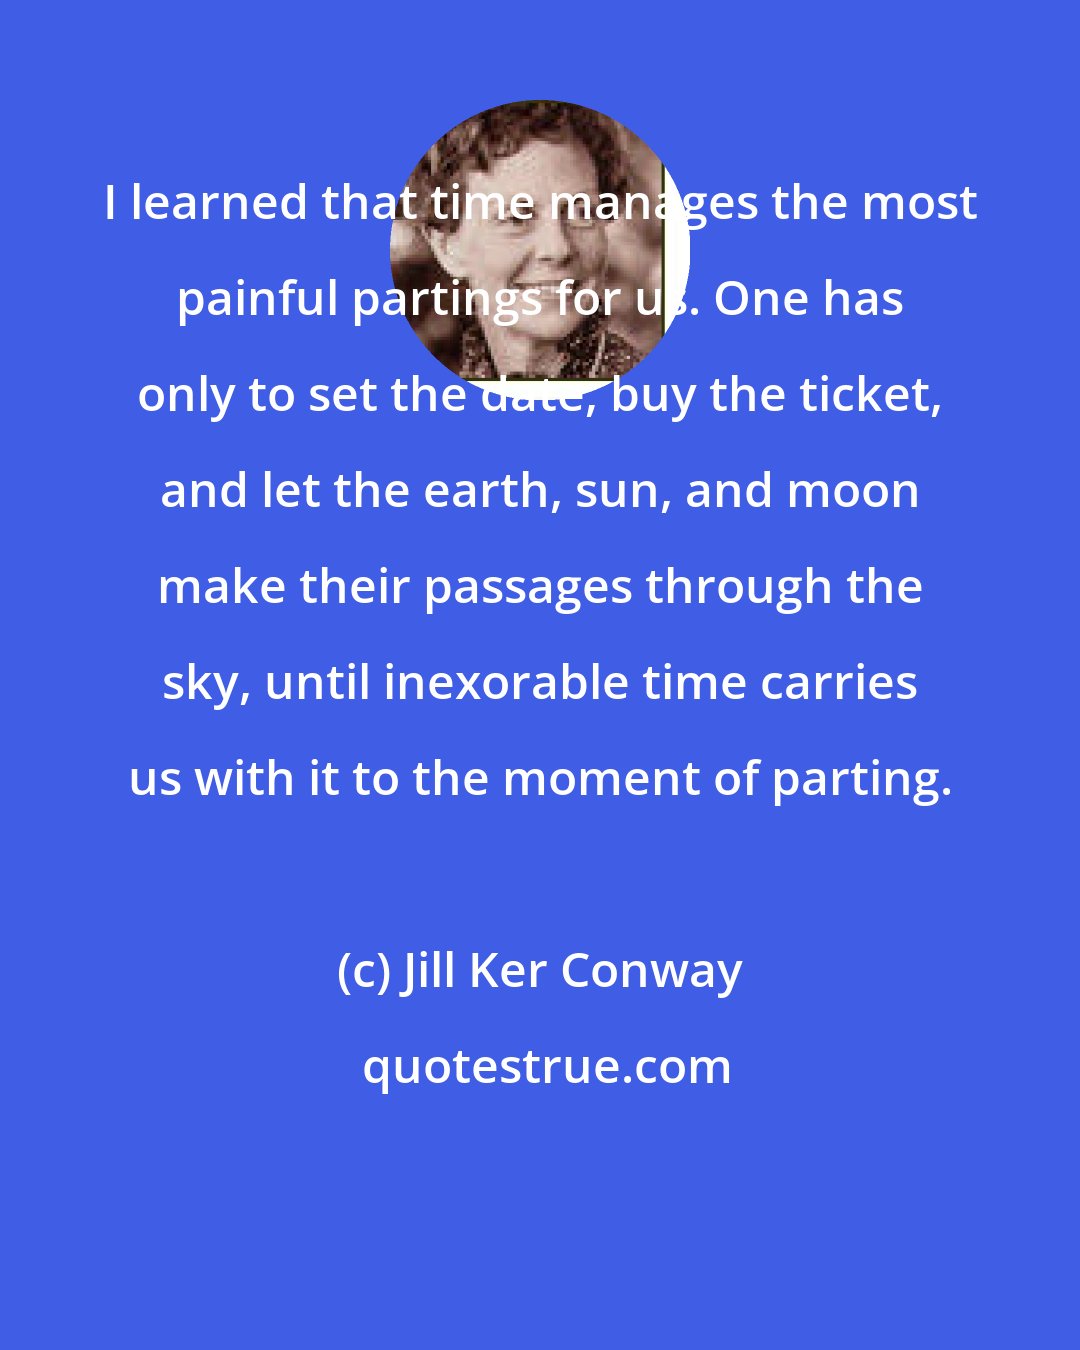 Jill Ker Conway: I learned that time manages the most painful partings for us. One has only to set the date, buy the ticket, and let the earth, sun, and moon make their passages through the sky, until inexorable time carries us with it to the moment of parting.